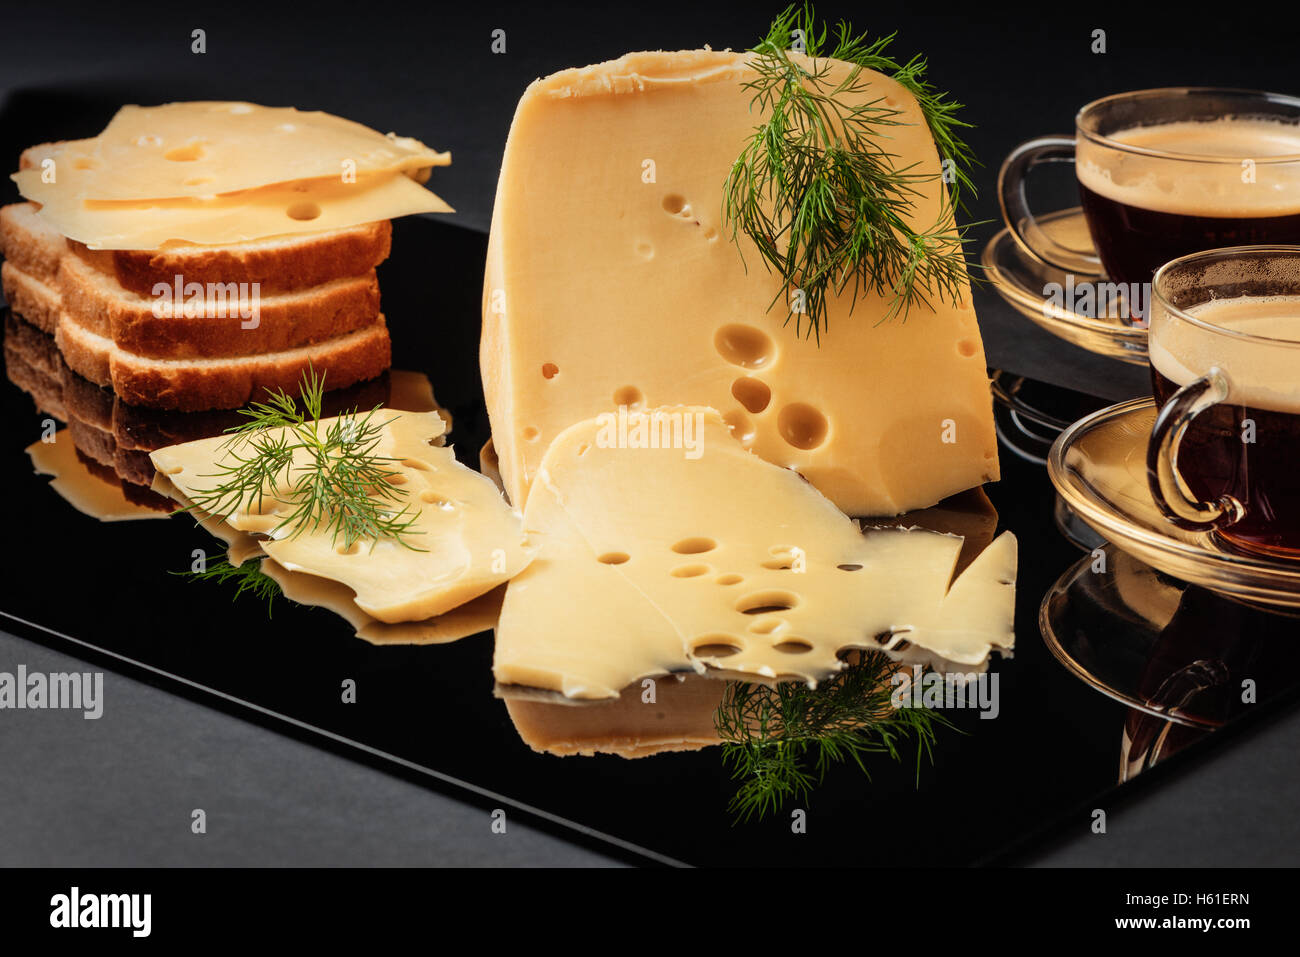 Cheese with fennel, white loaf and two cups of coffee on a black background Stock Photo